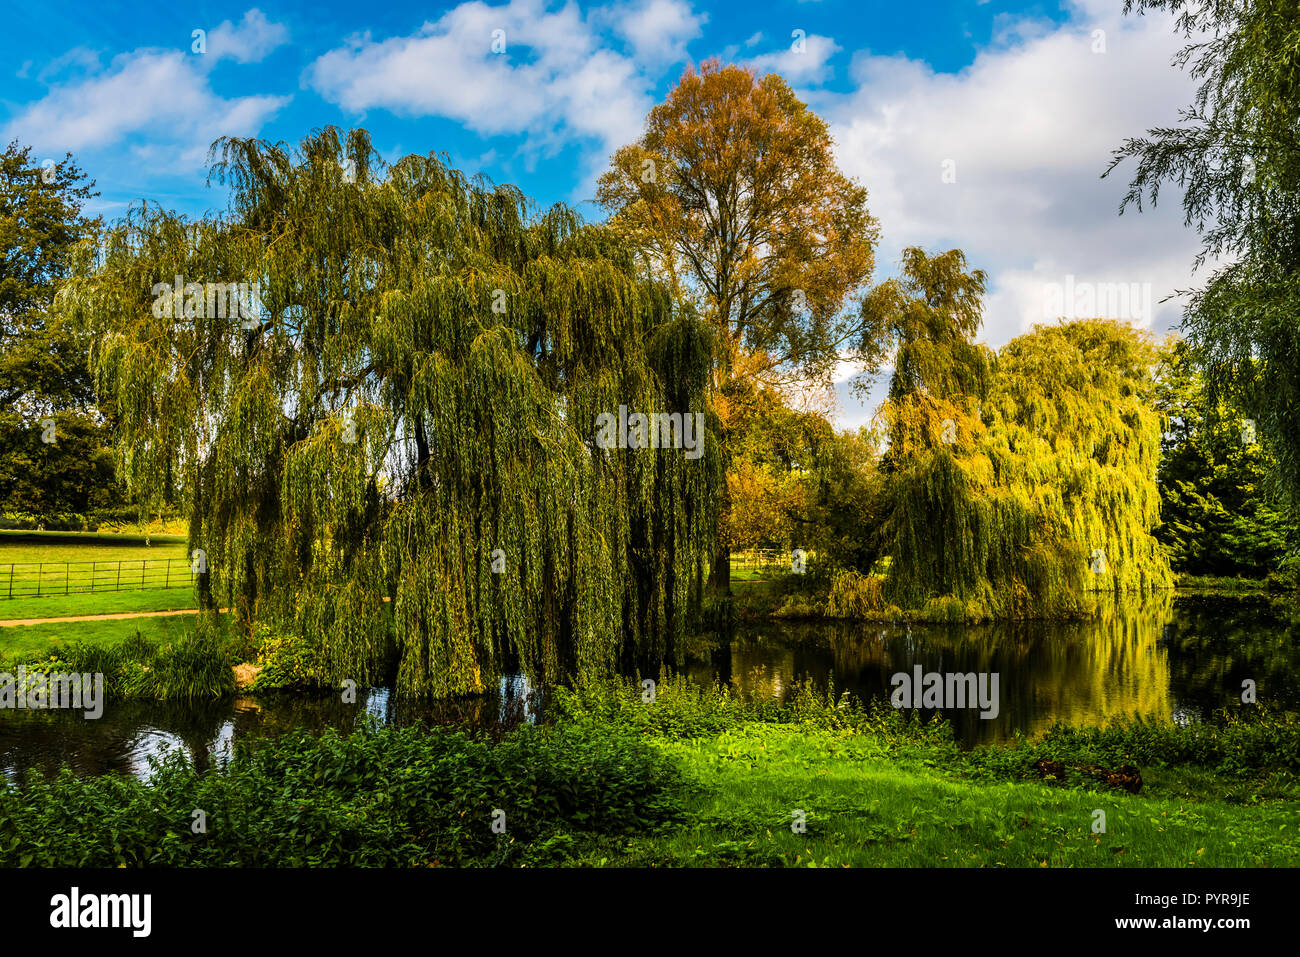 Autumn Willow Trees By The Lake At The Vyne Hampshire Uk Stock Photo Alamy